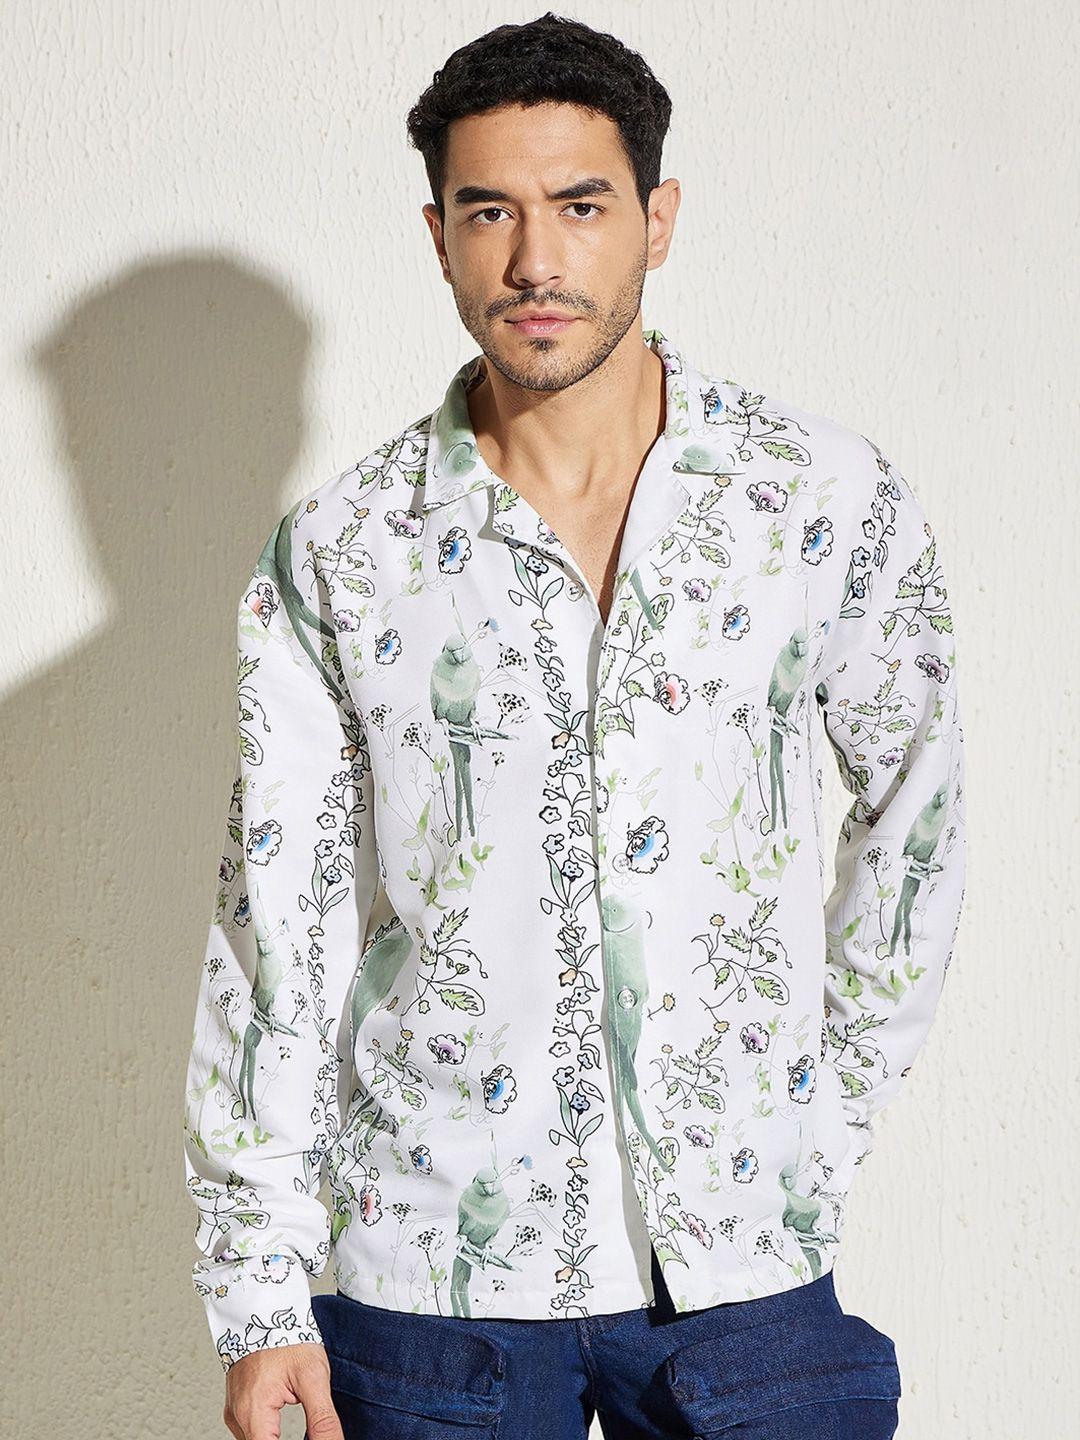 fugazee relaxed floral printed spread collar casual shirt